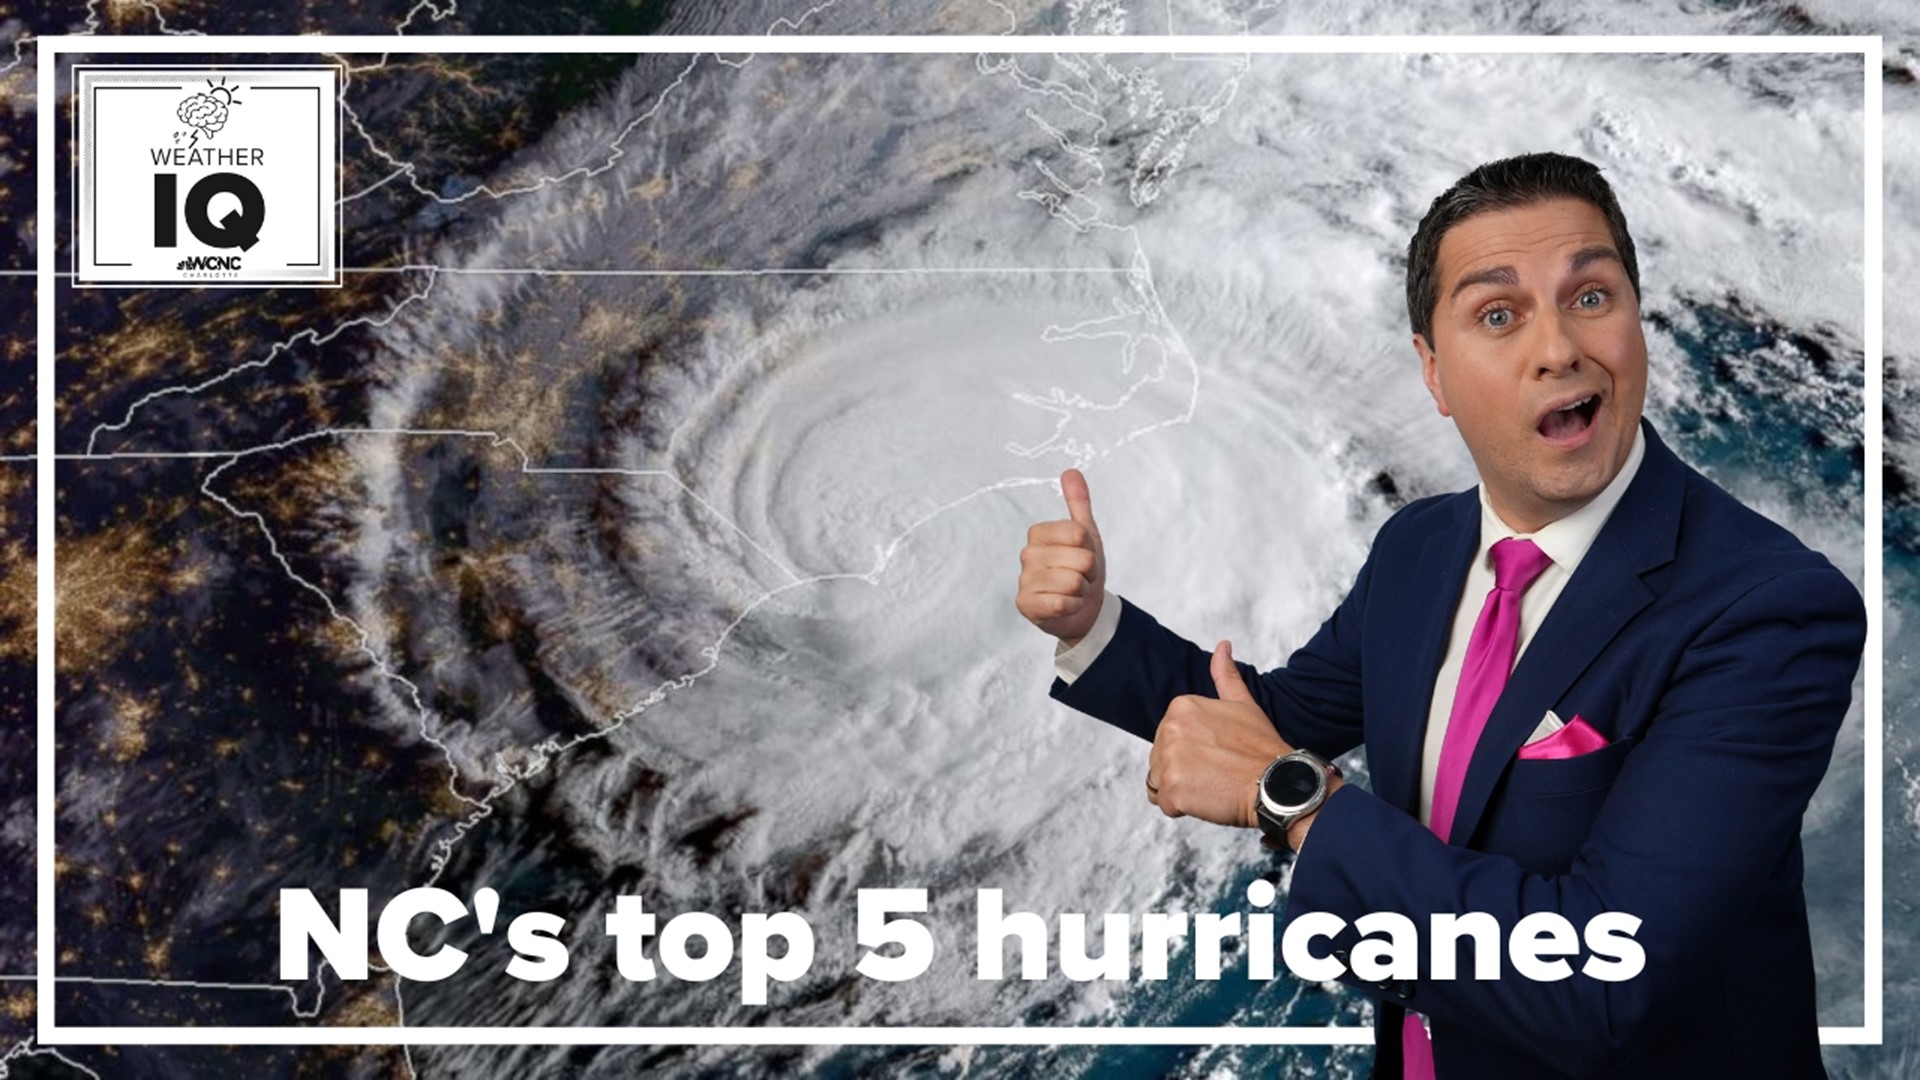 Here are the 5 strongest hurricanes (based on wind speed) to ever impact the Carolinas. And there are some storms you likely have never heard about.